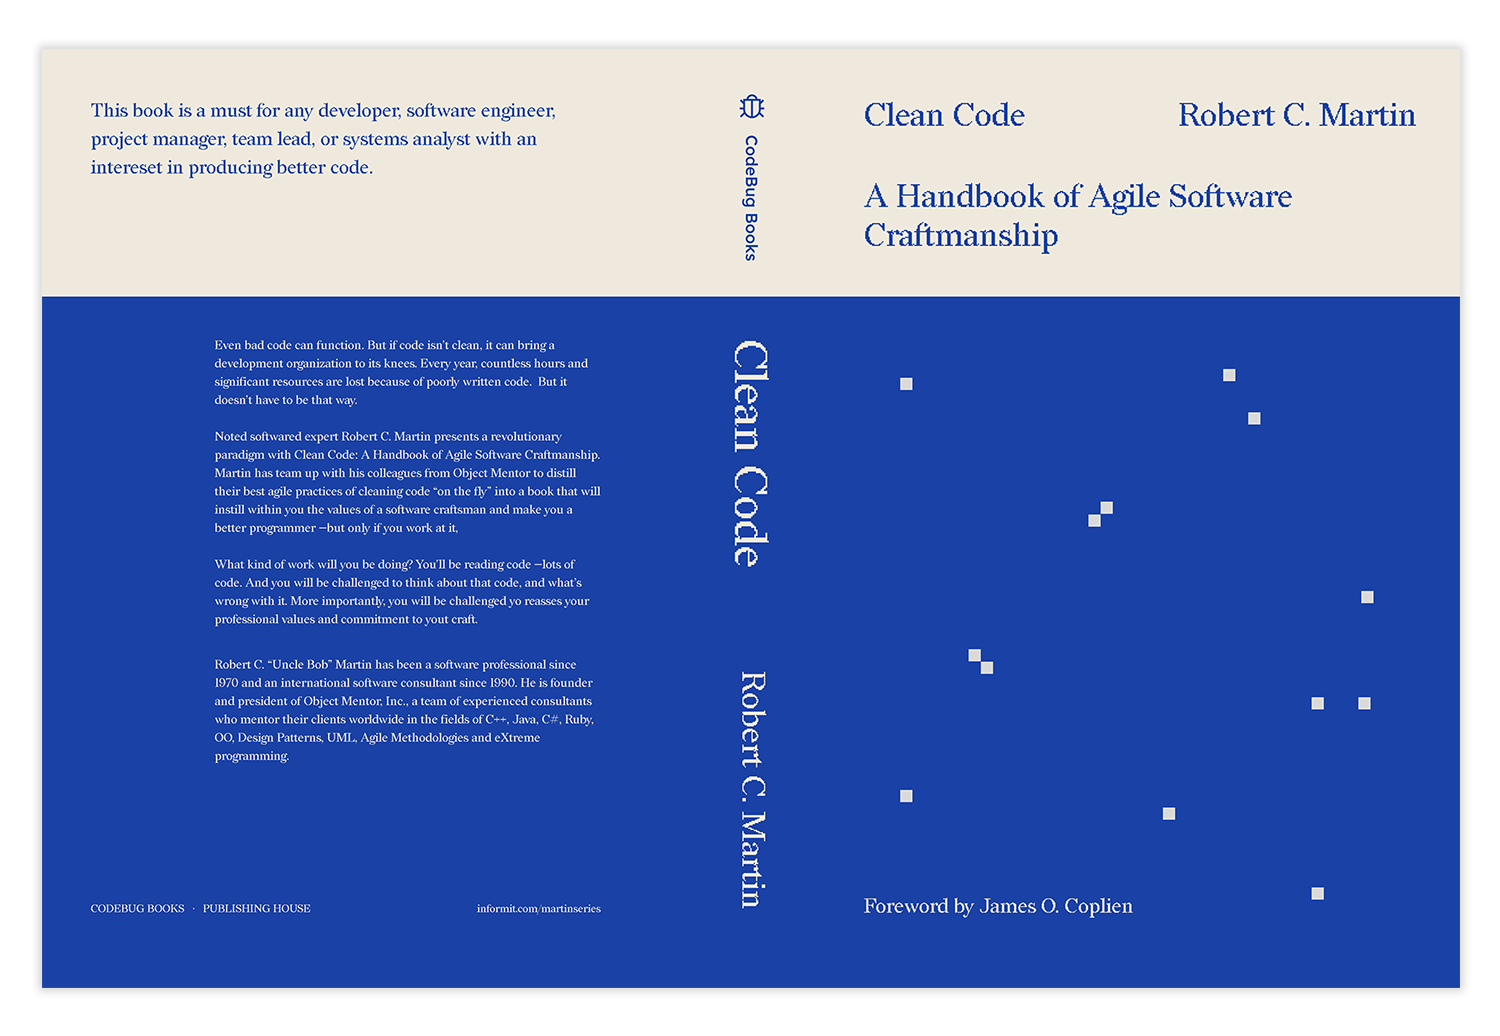 Cover design for "Clean Code". It is a vector design in electric blue and cream colors. It displays the front cover, spine, and back cover. On the front cover, there are small square pixels depicting a starry sky.